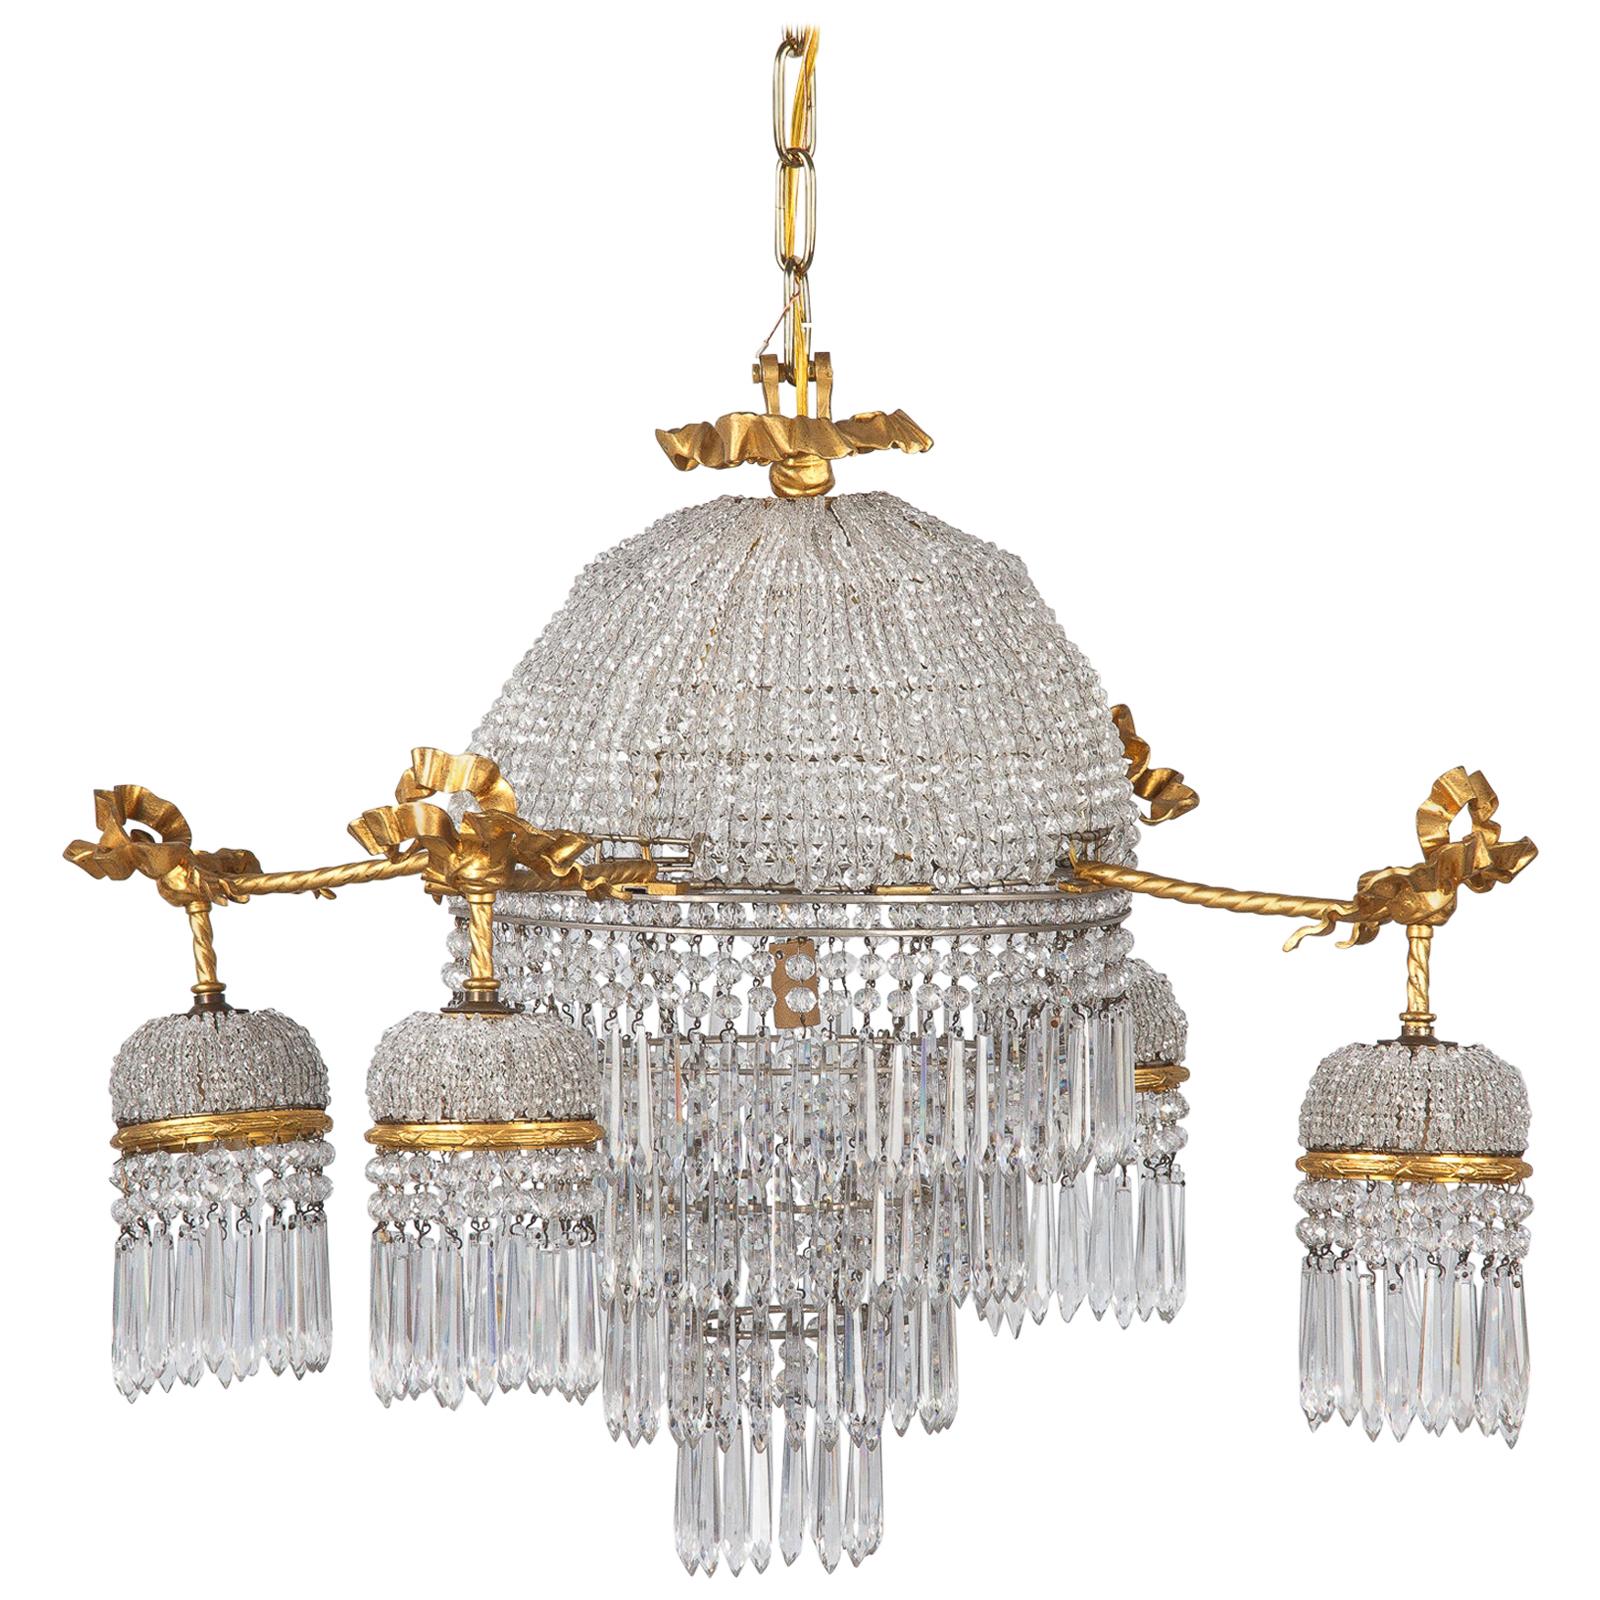 French Louis XVI Style Gilded Bronze and Crystal 5-Light Chandelier, 1900s